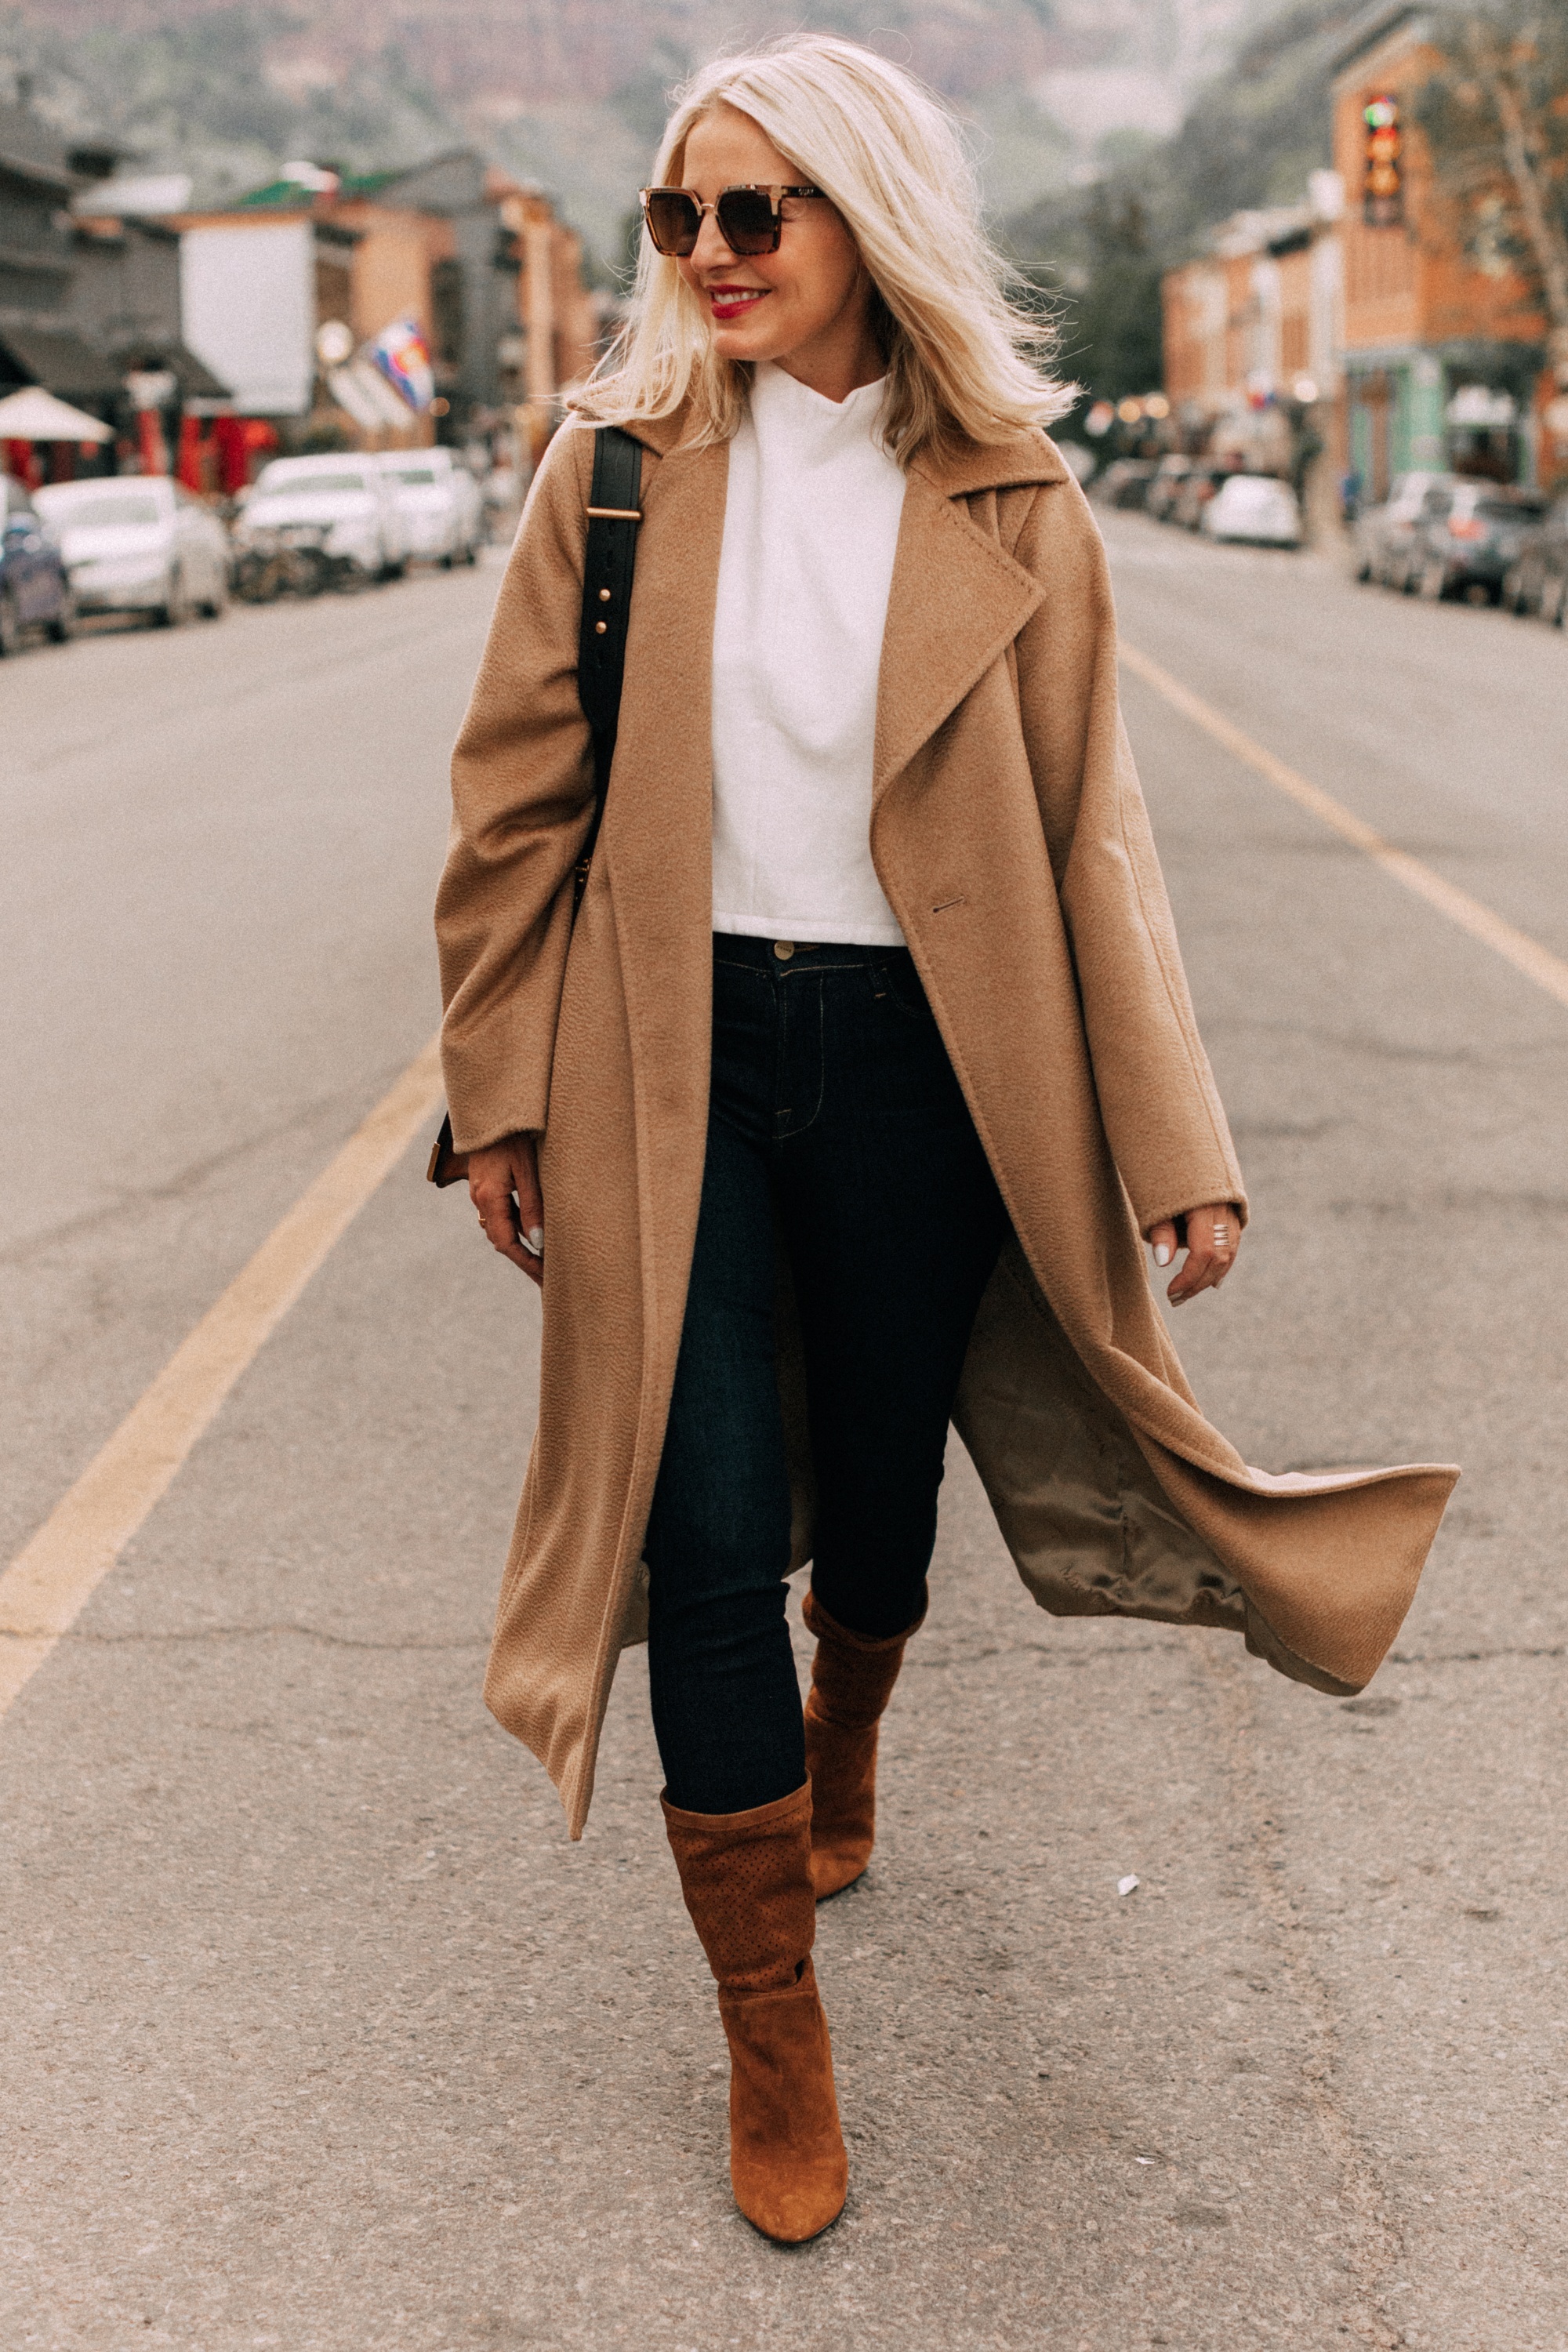 Camel hair coat by Max Mara on fashion blogger over 40 Erin Busbee of Busbee Style in Telluride, Colorado